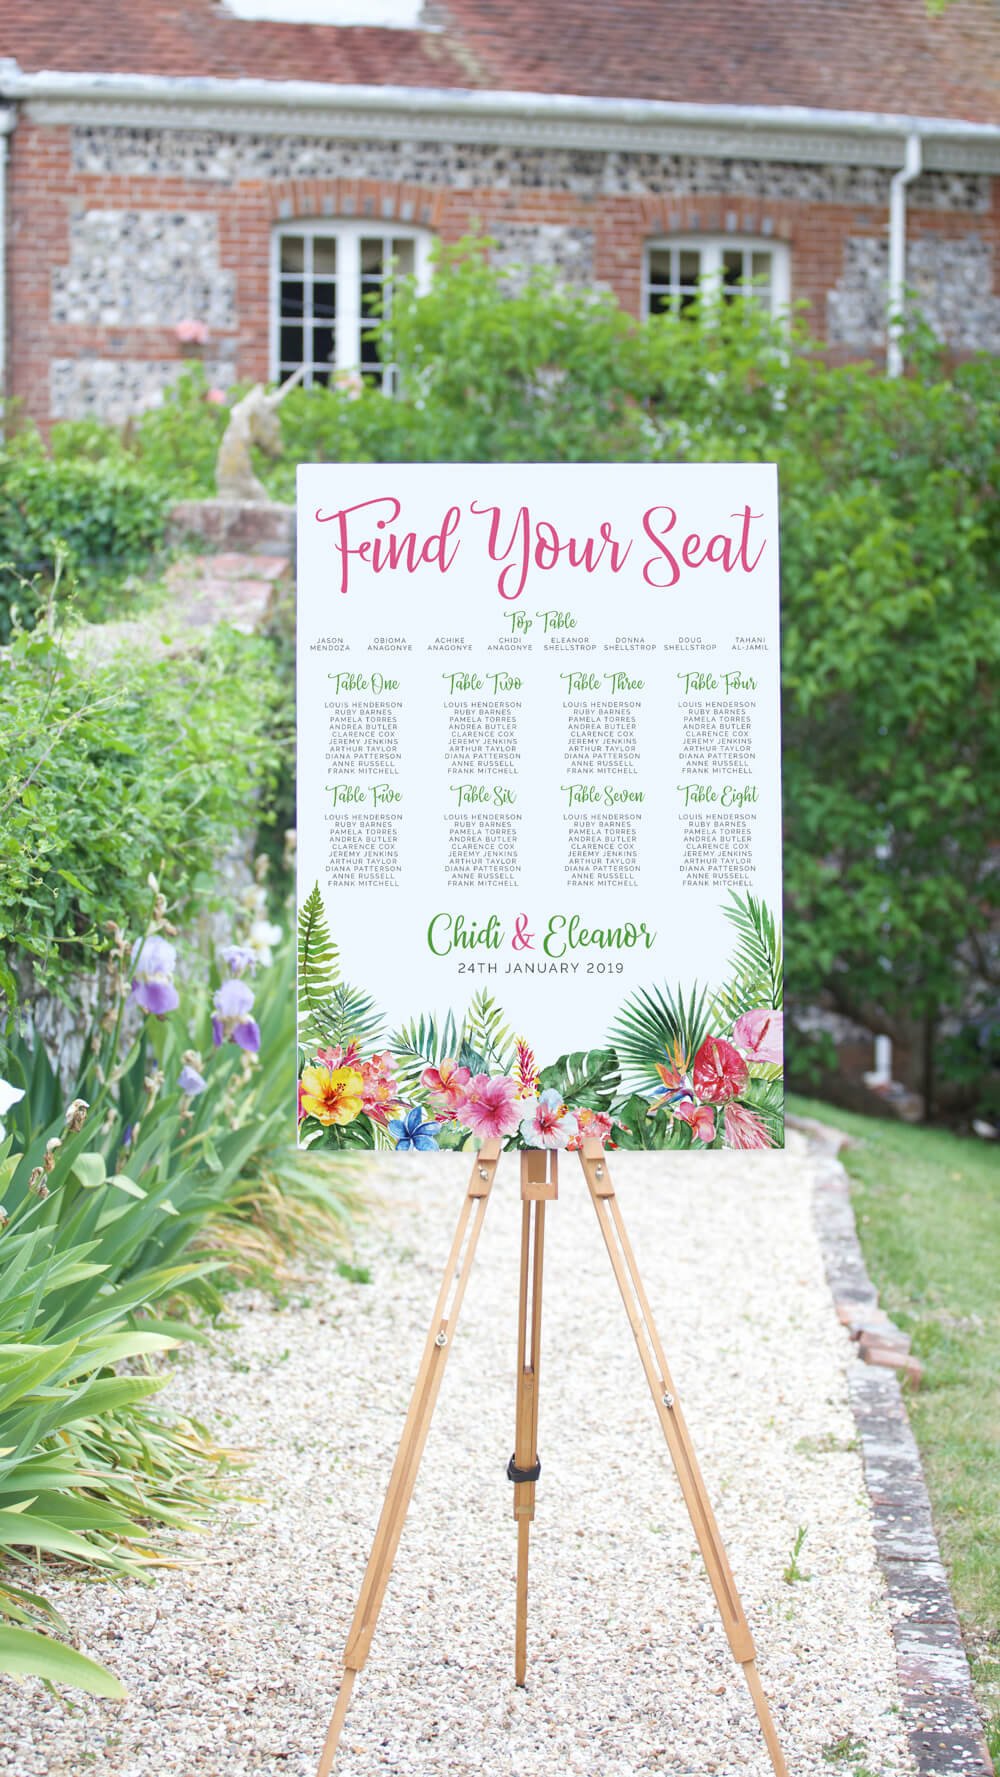 Rainforest Feathers Table Plan